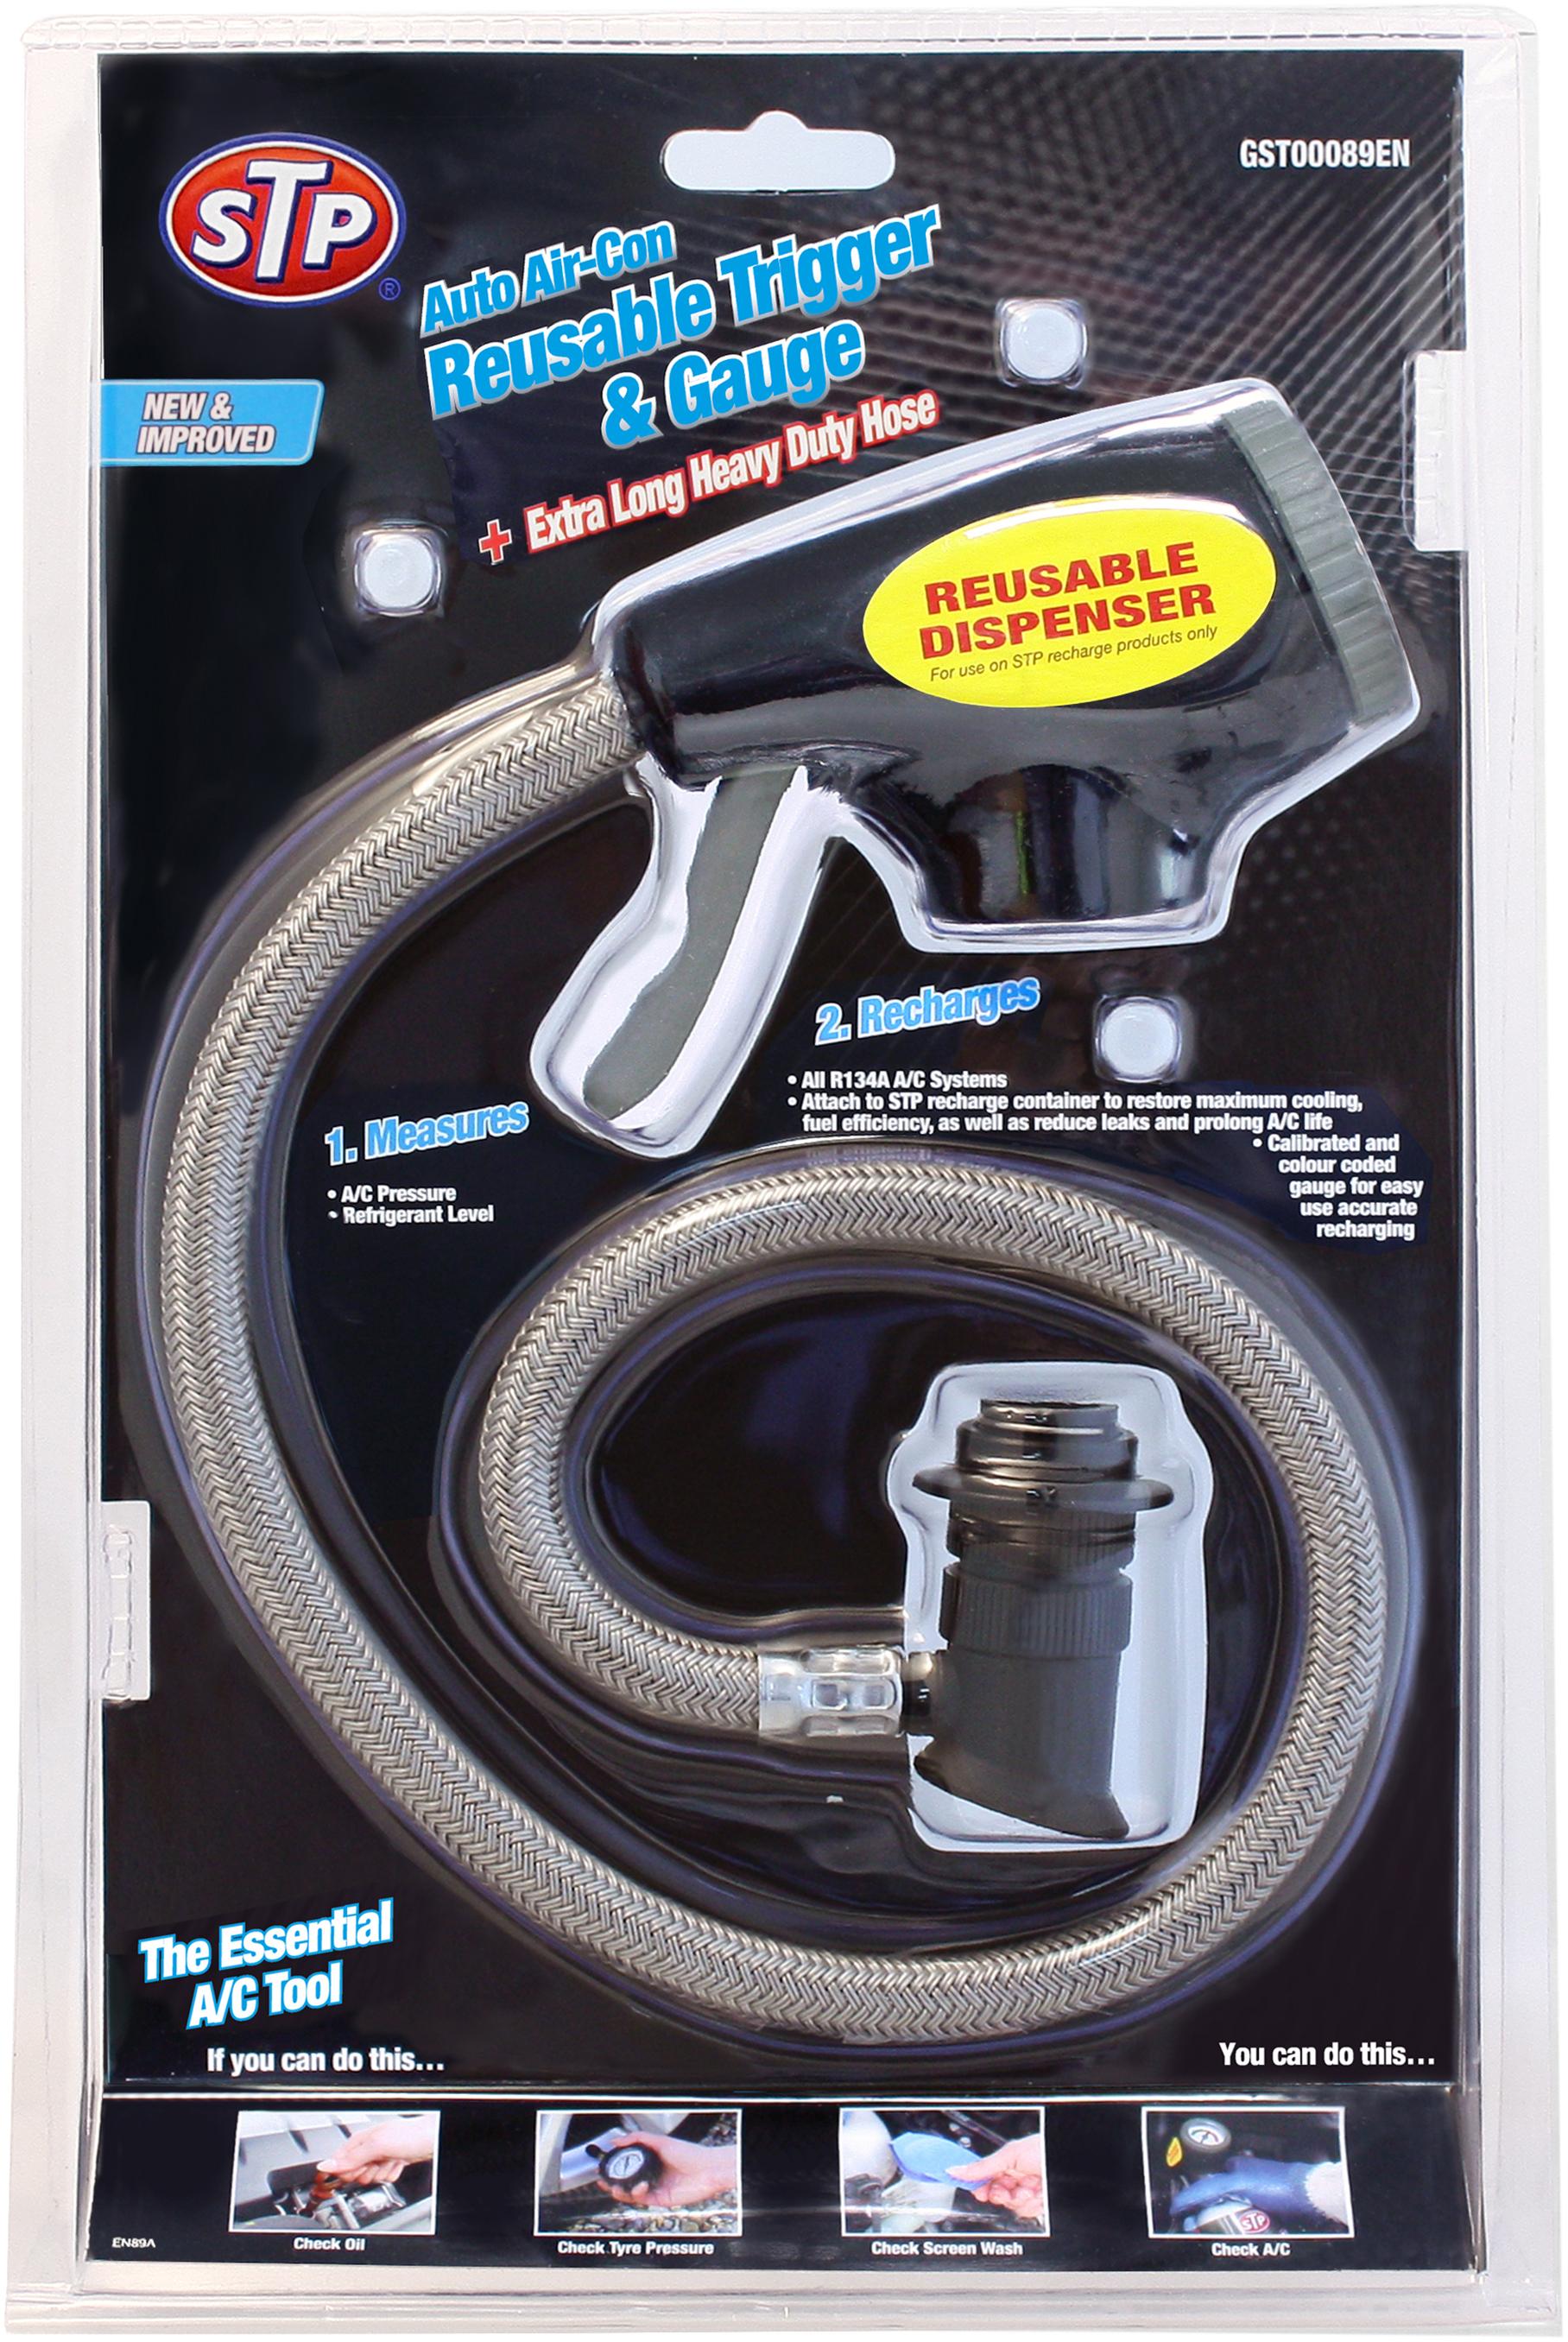 Stp Air-Con Reusable Trigger And Gauge - For Gas R134A